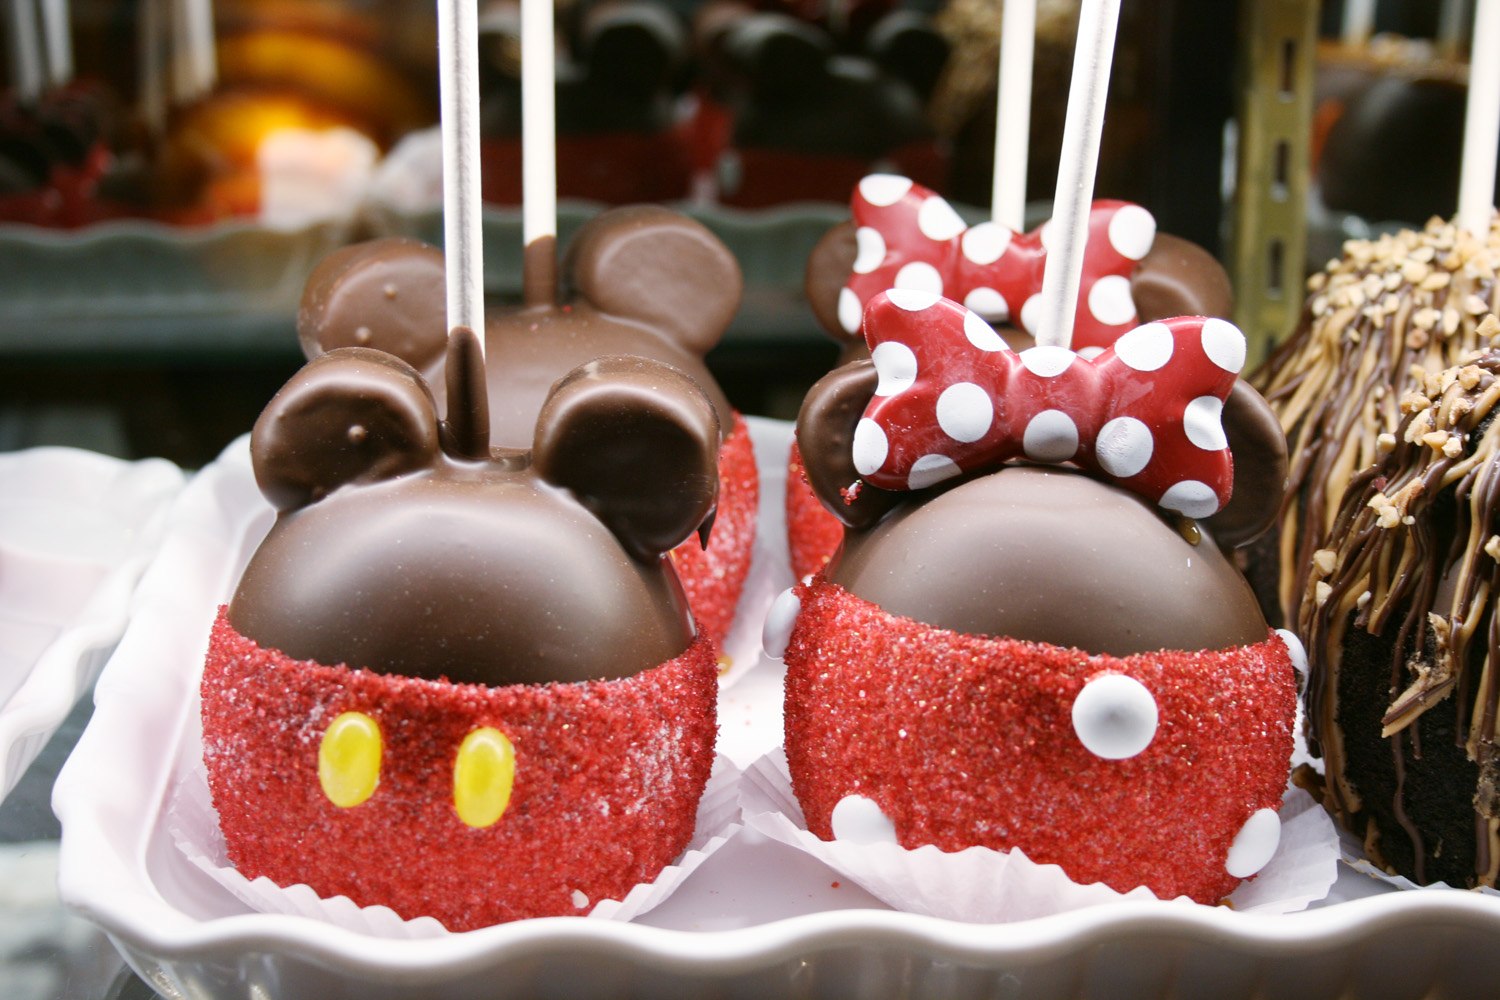 Eat Your Way Through Disney World and We’ll Tell You If You’ll Become a Billionaire 3 Mickey Candy Apple disney